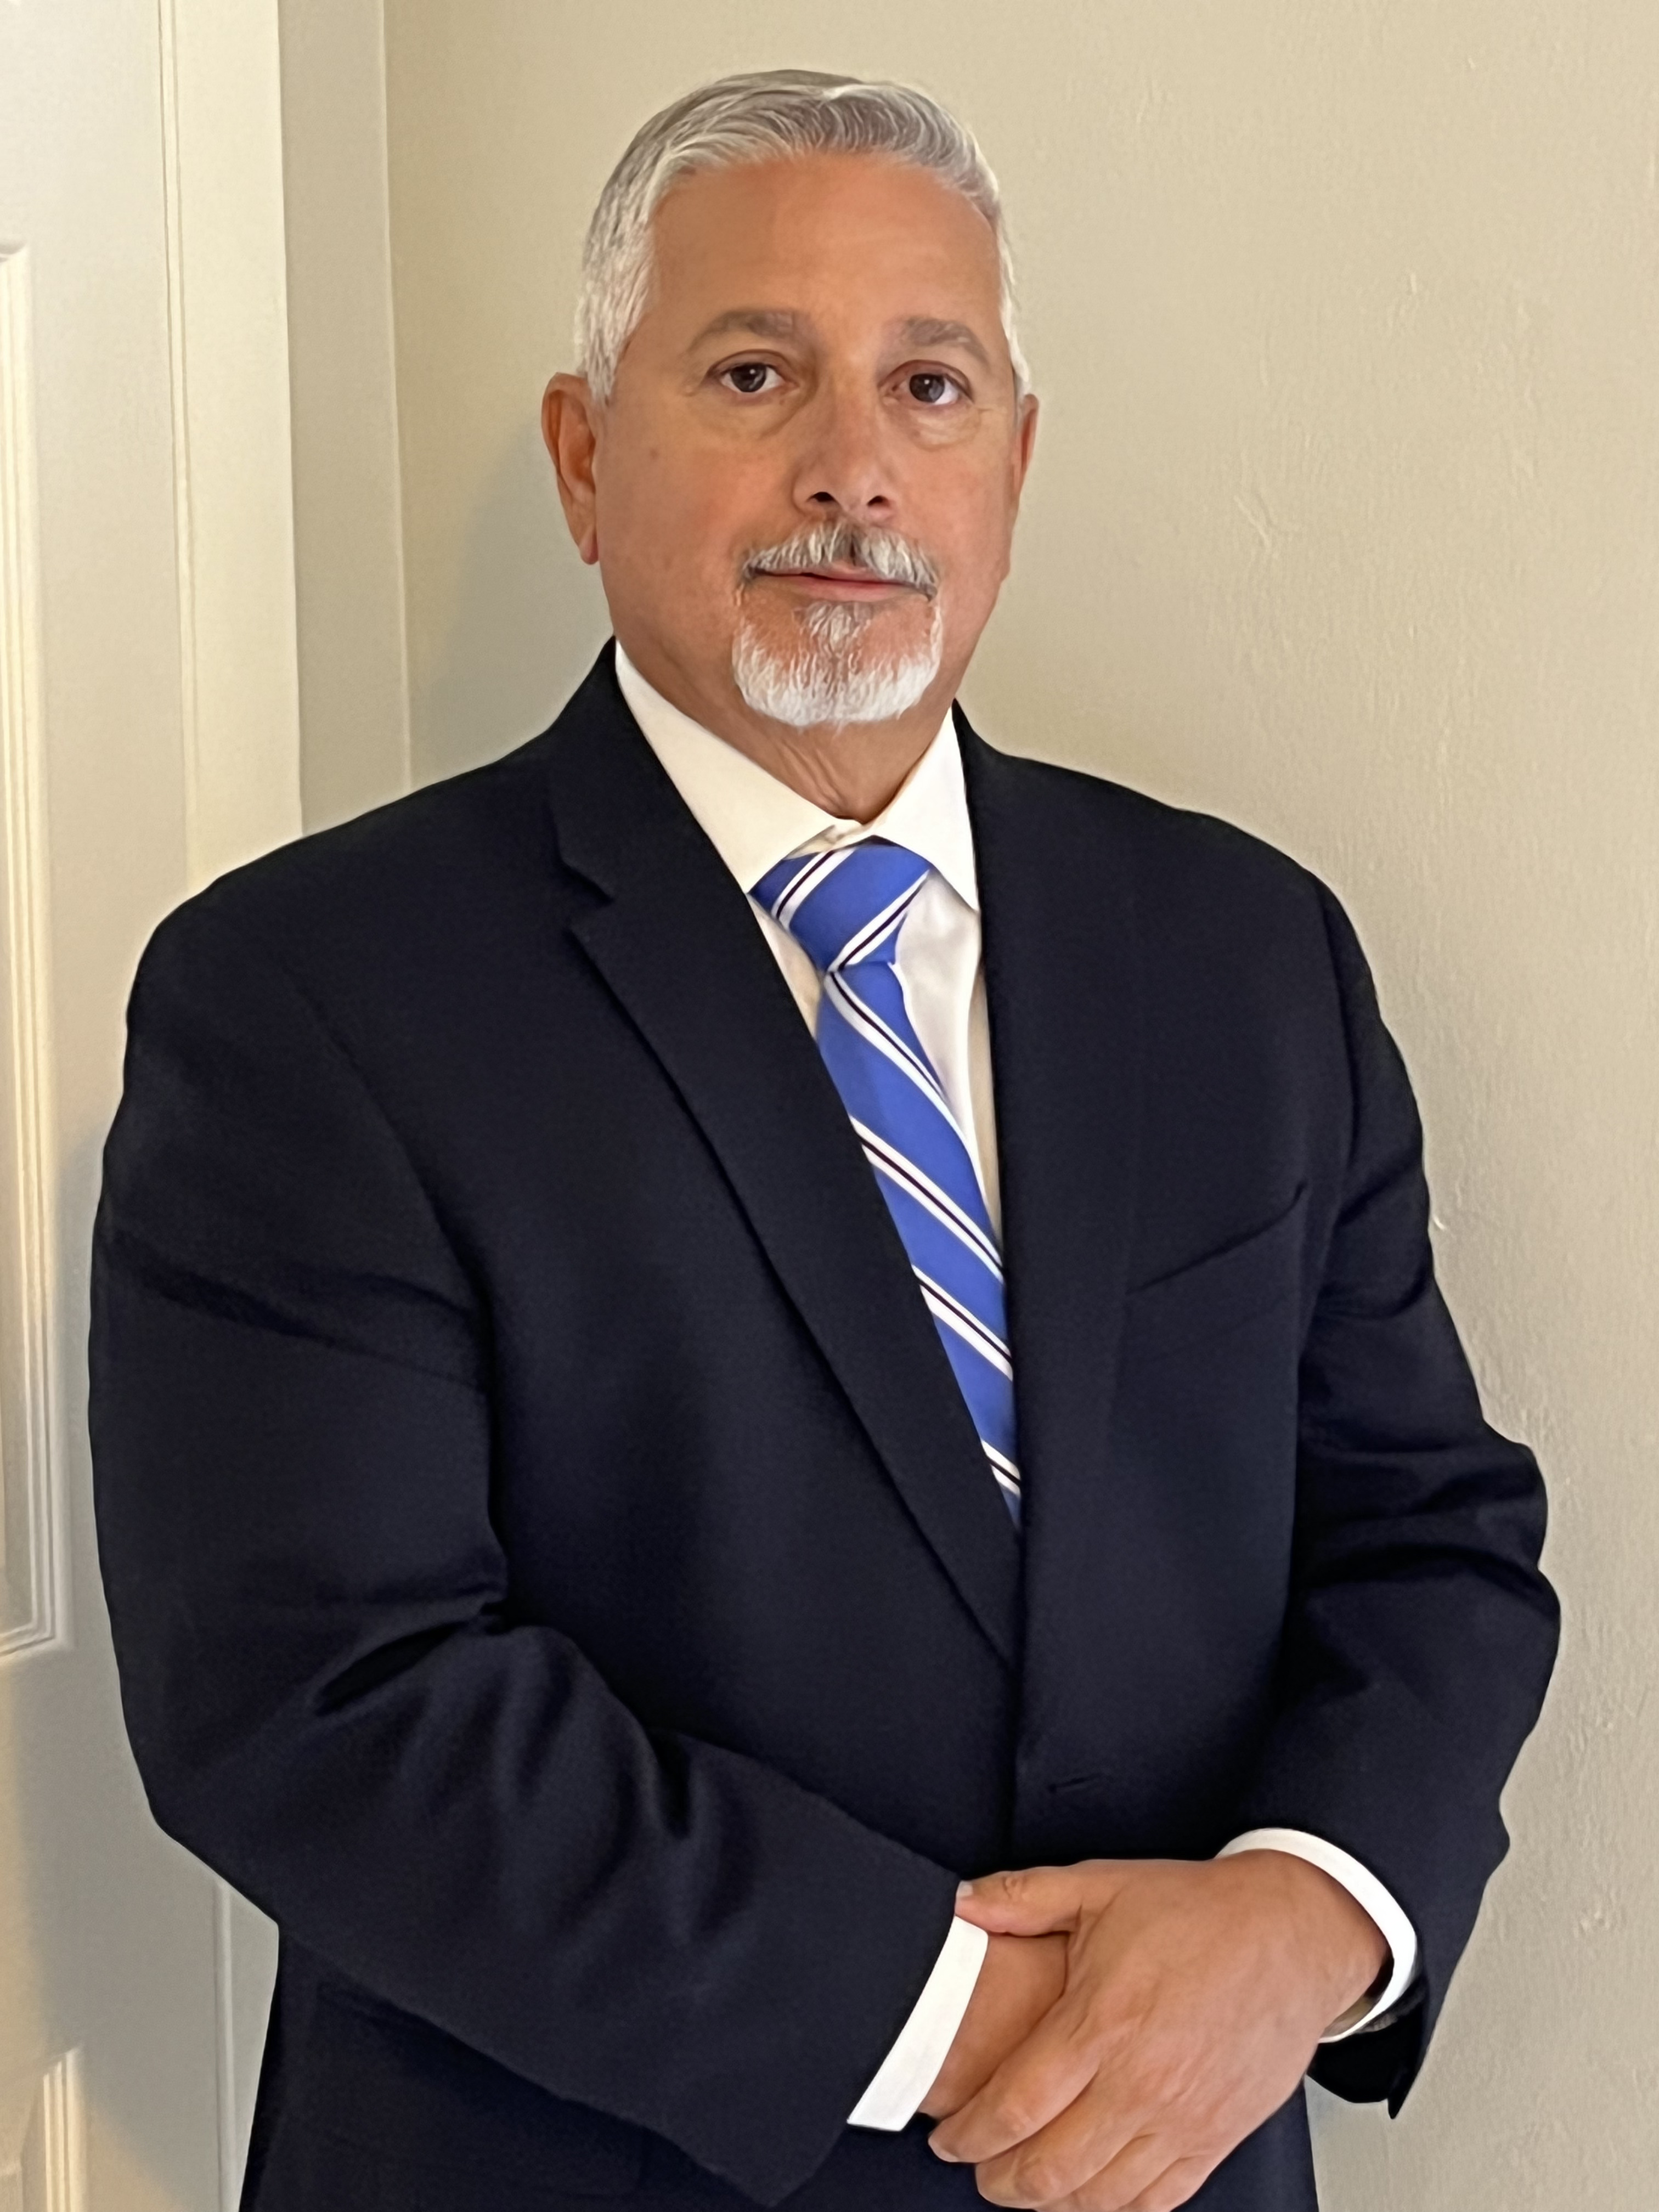 Luis Hernandez, Director and Managing Partner of Supply Chain Division.